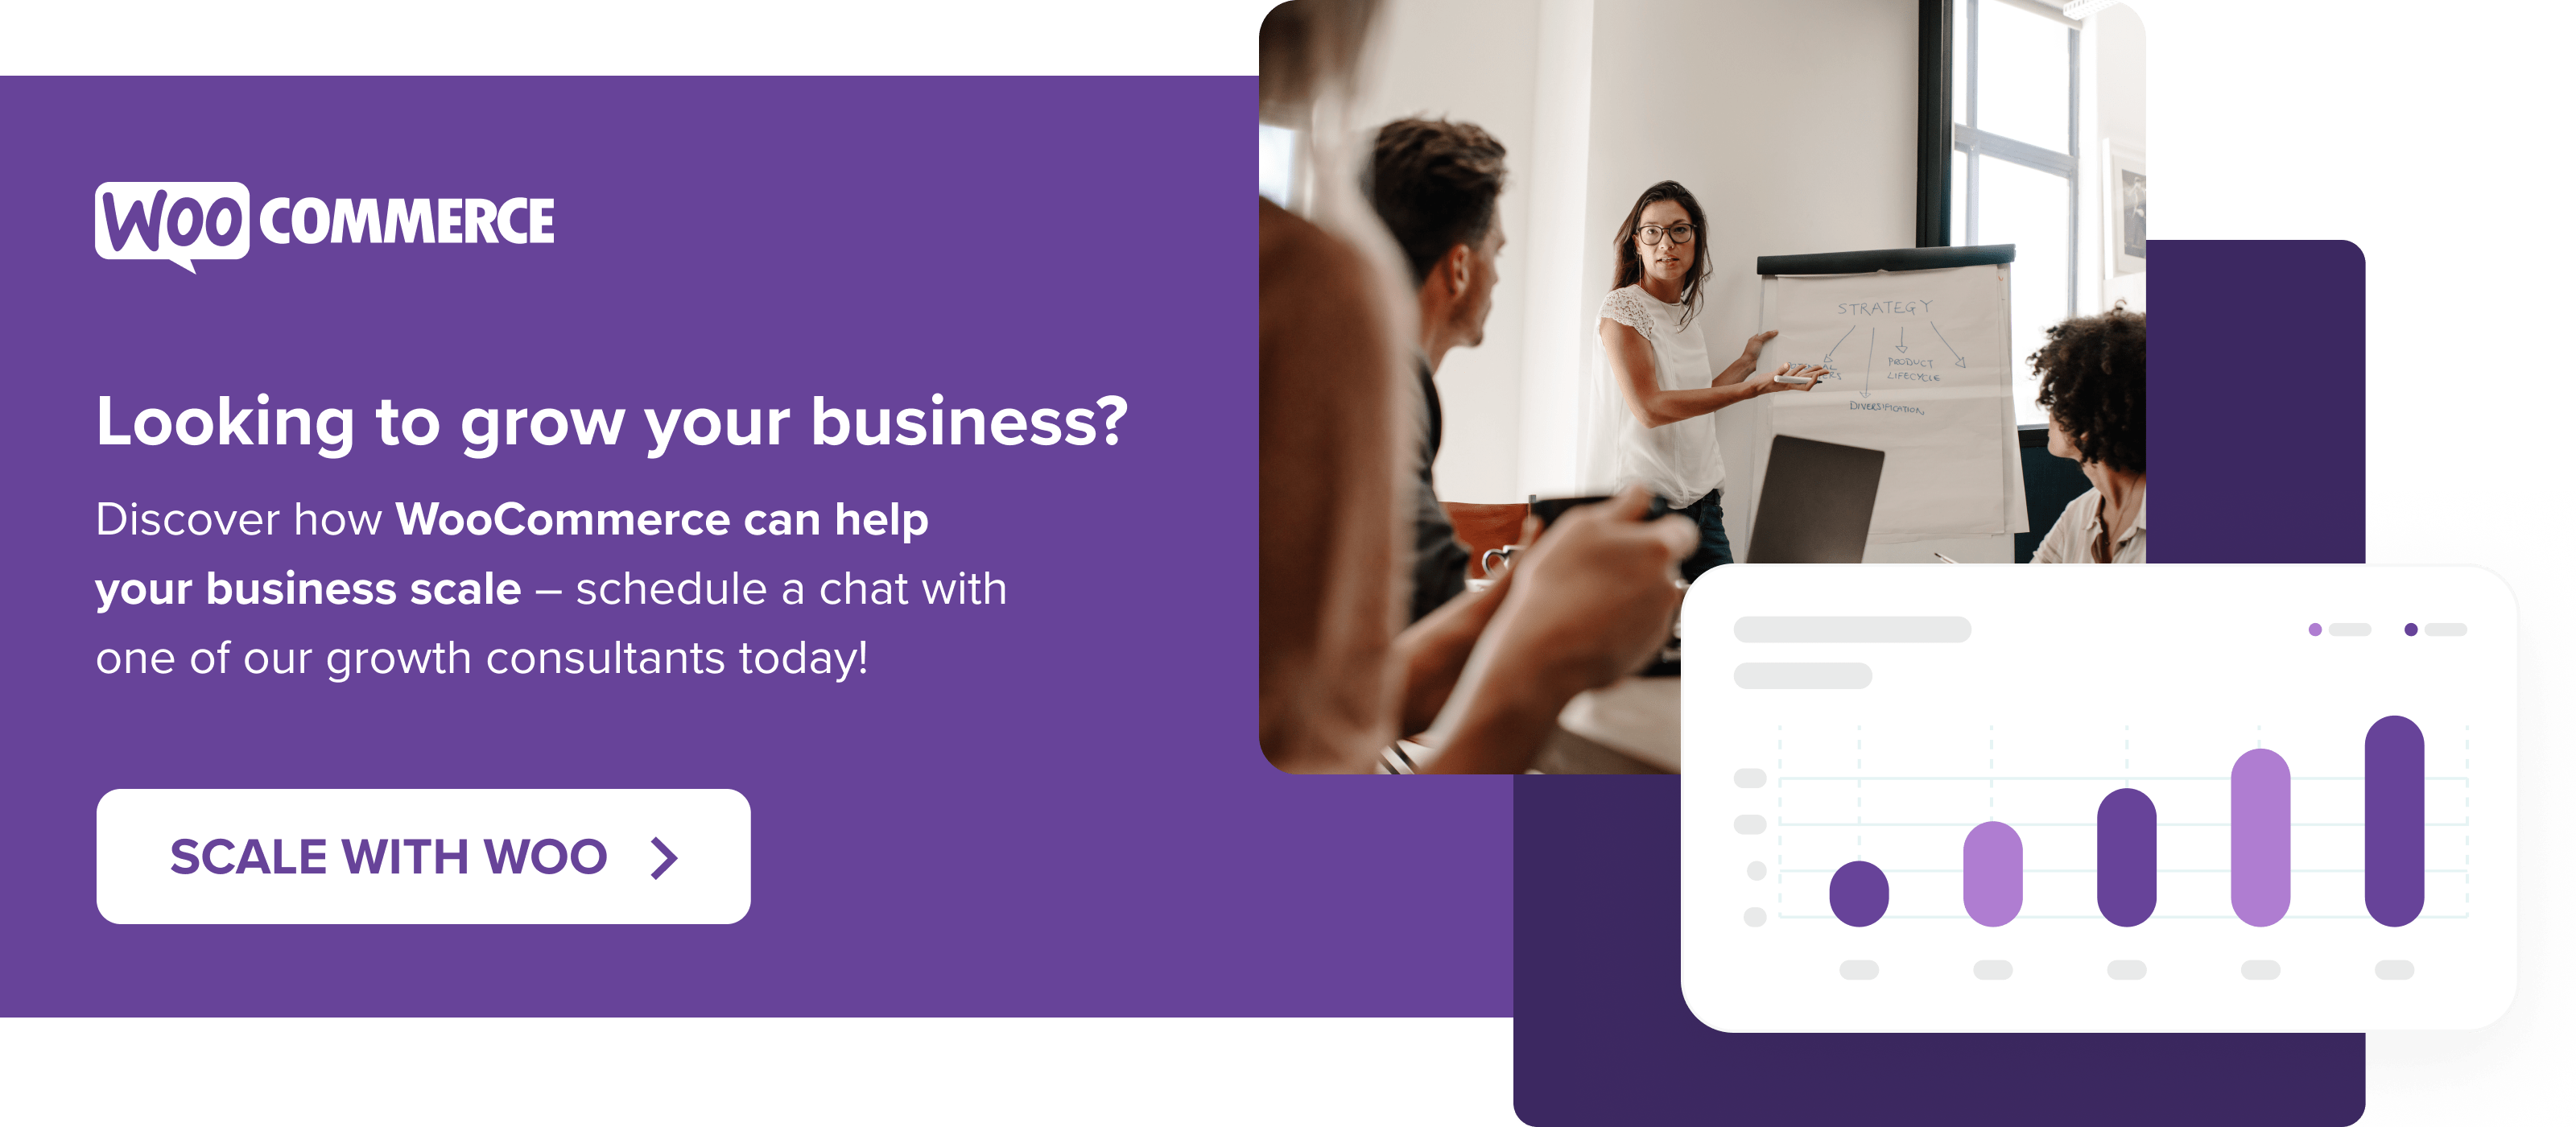 Grow your business with Woo